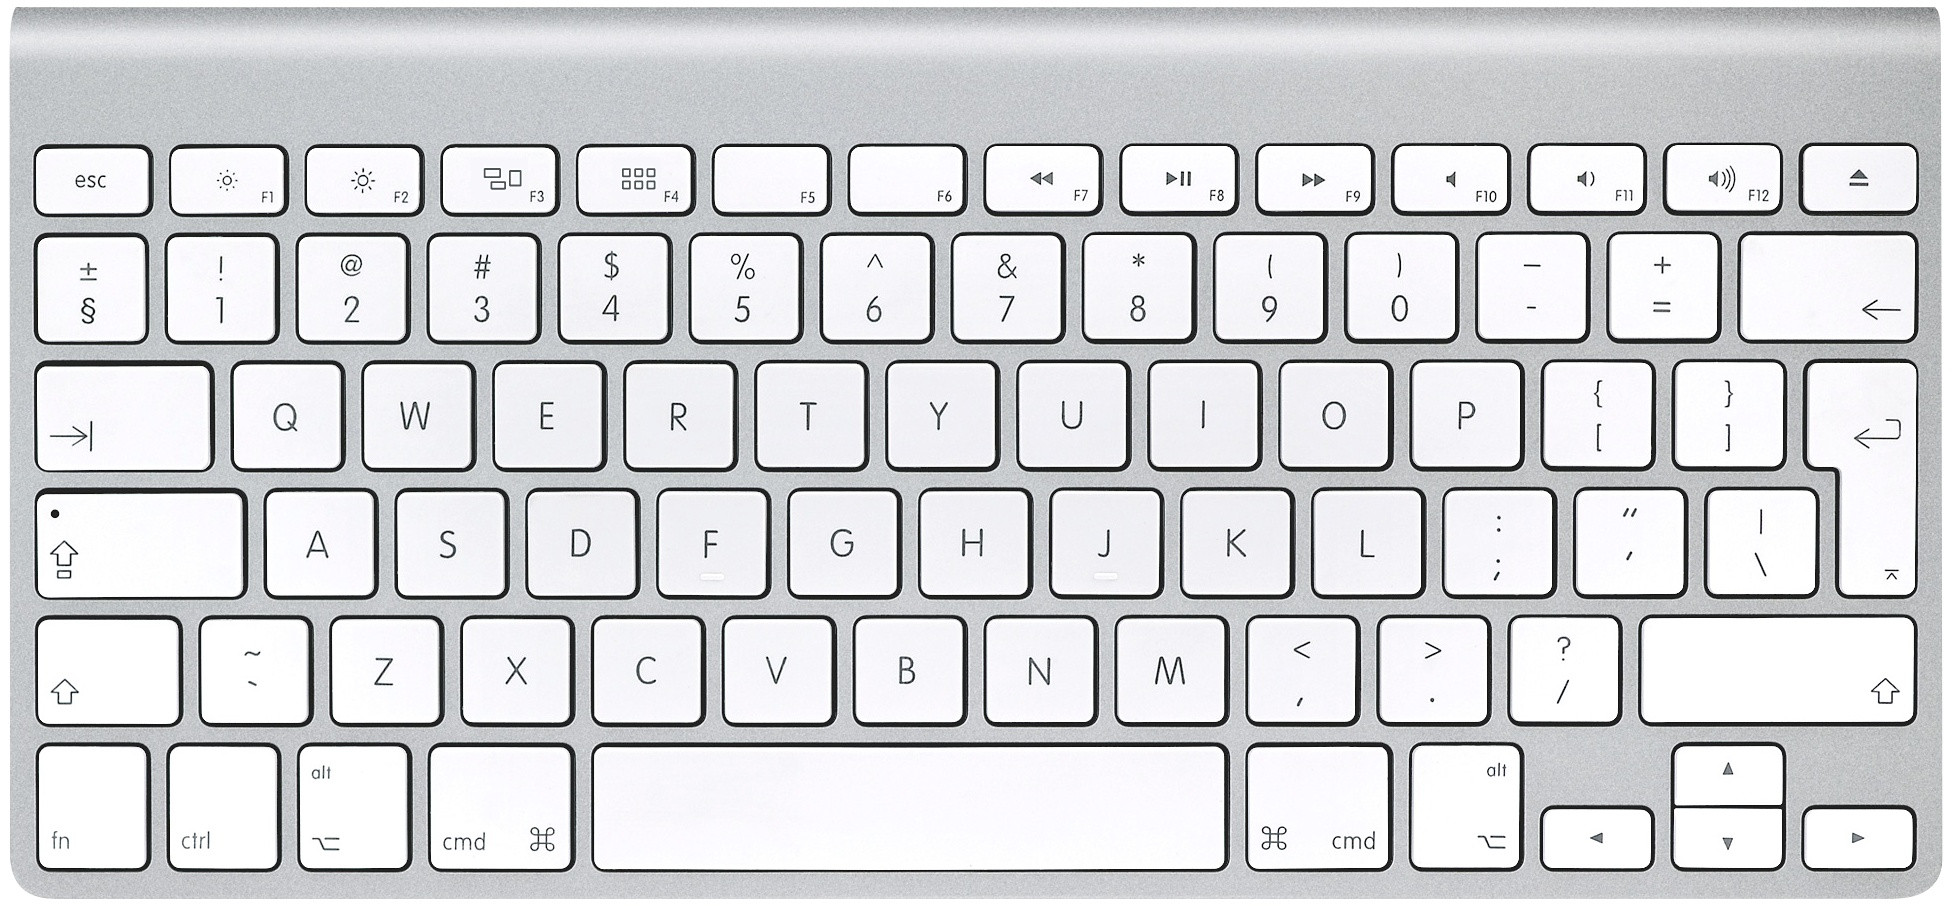 Difference between US QWERTY and International QWERTY Apple keyboards?